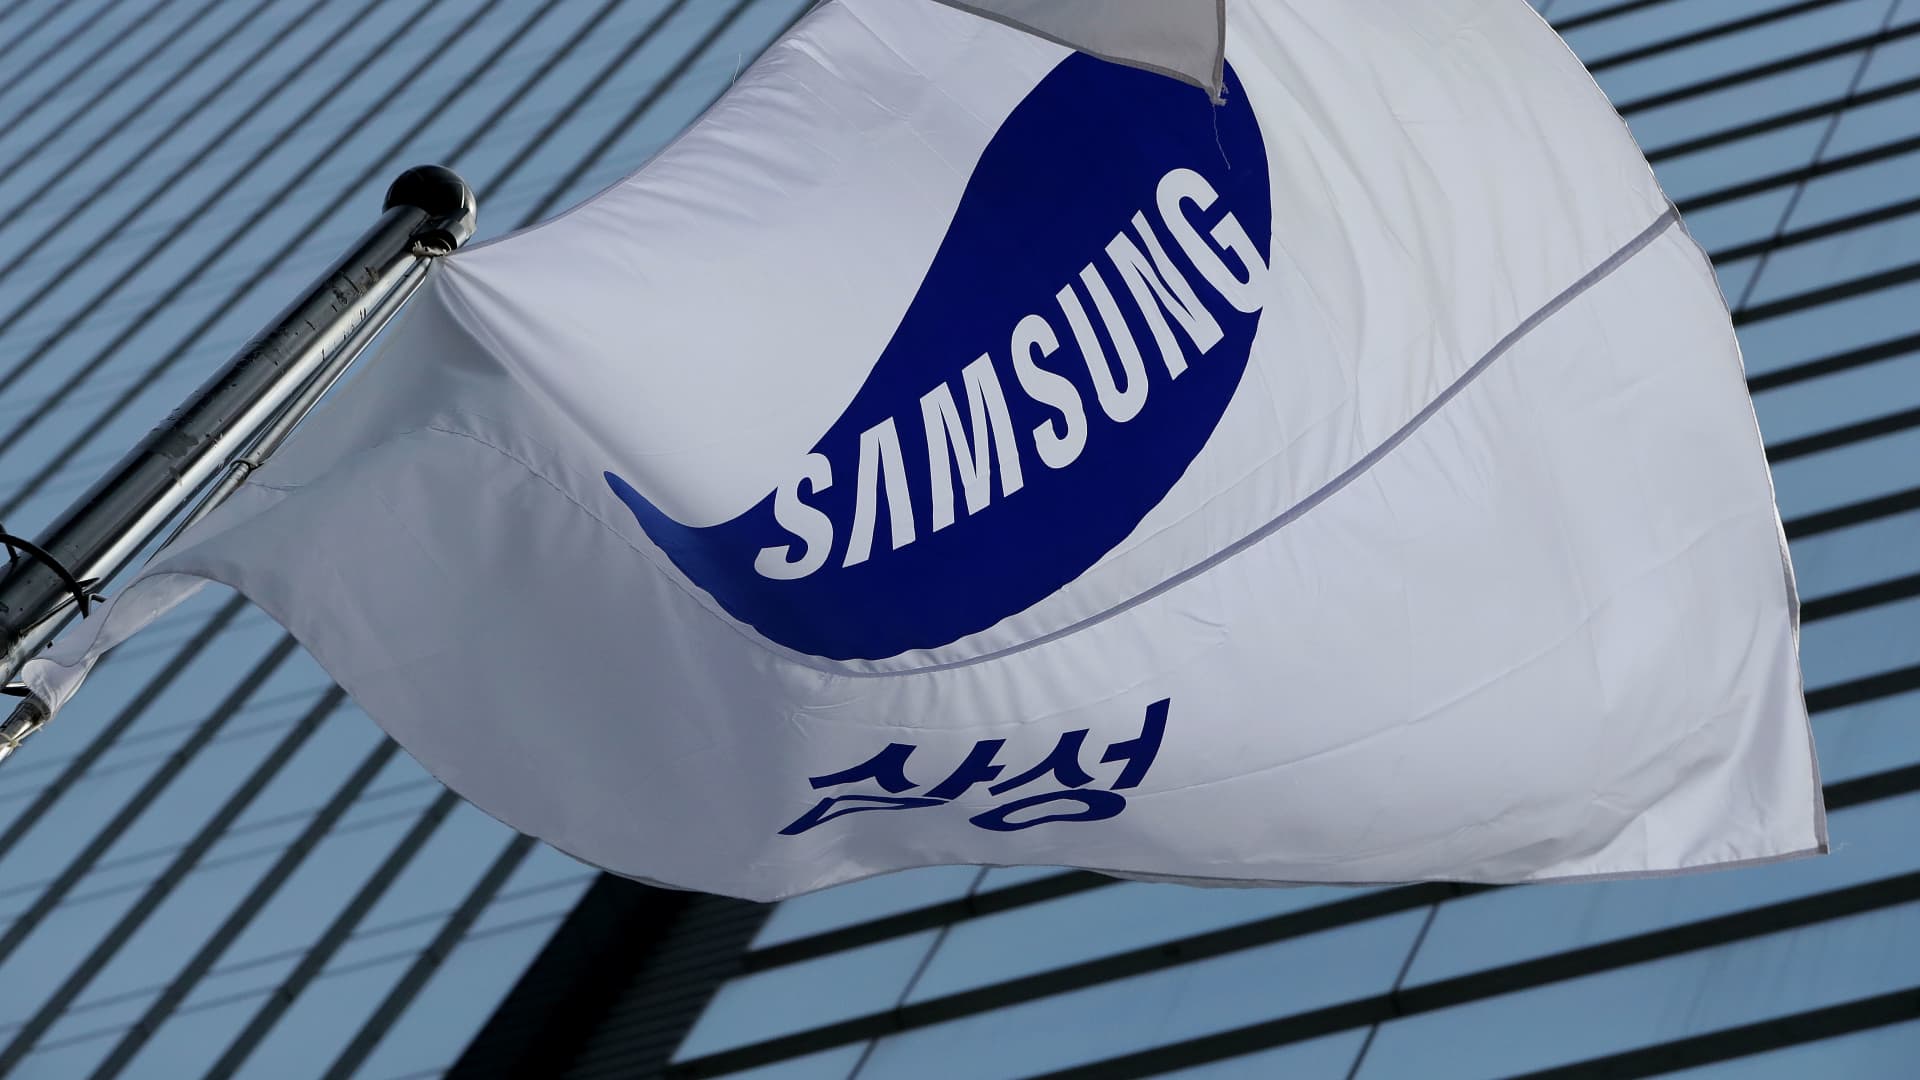 Samsung's Q2 earnings 'better than feared' and spur chip stock rally